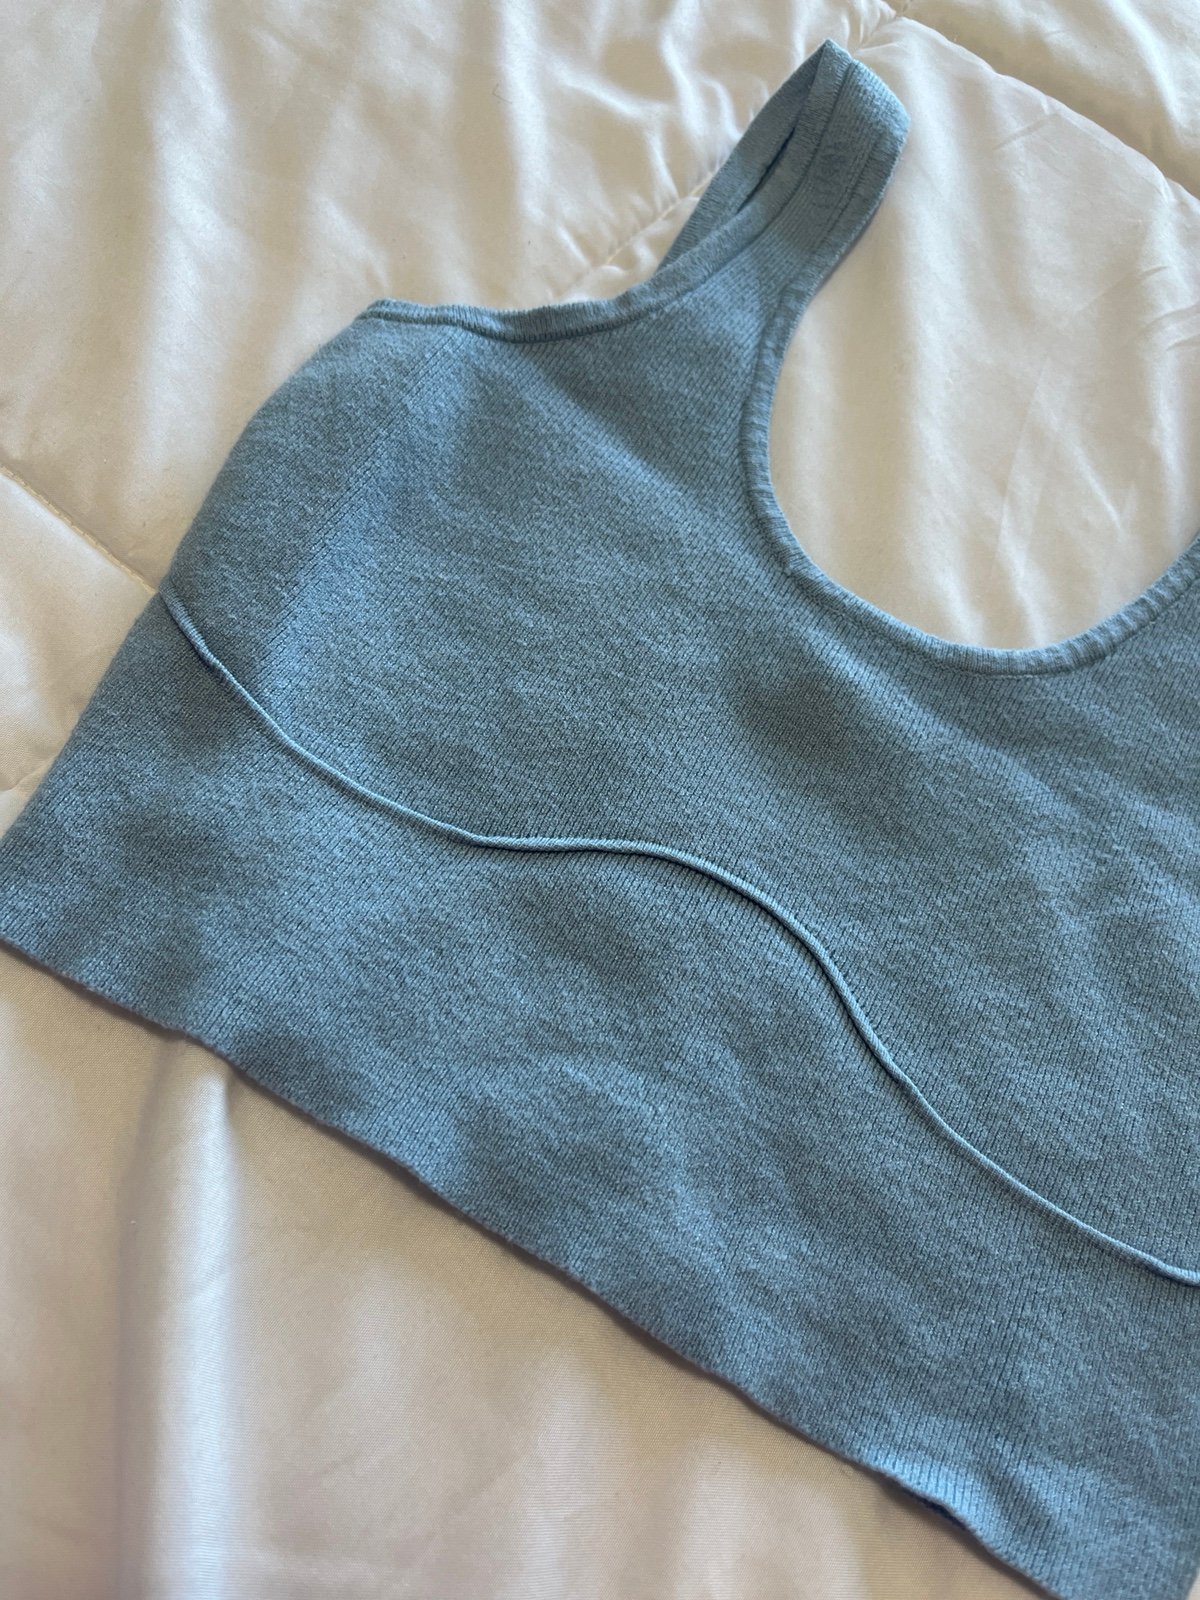 Popular kendall and kylie knit tank Oaok4Dd6T Cool